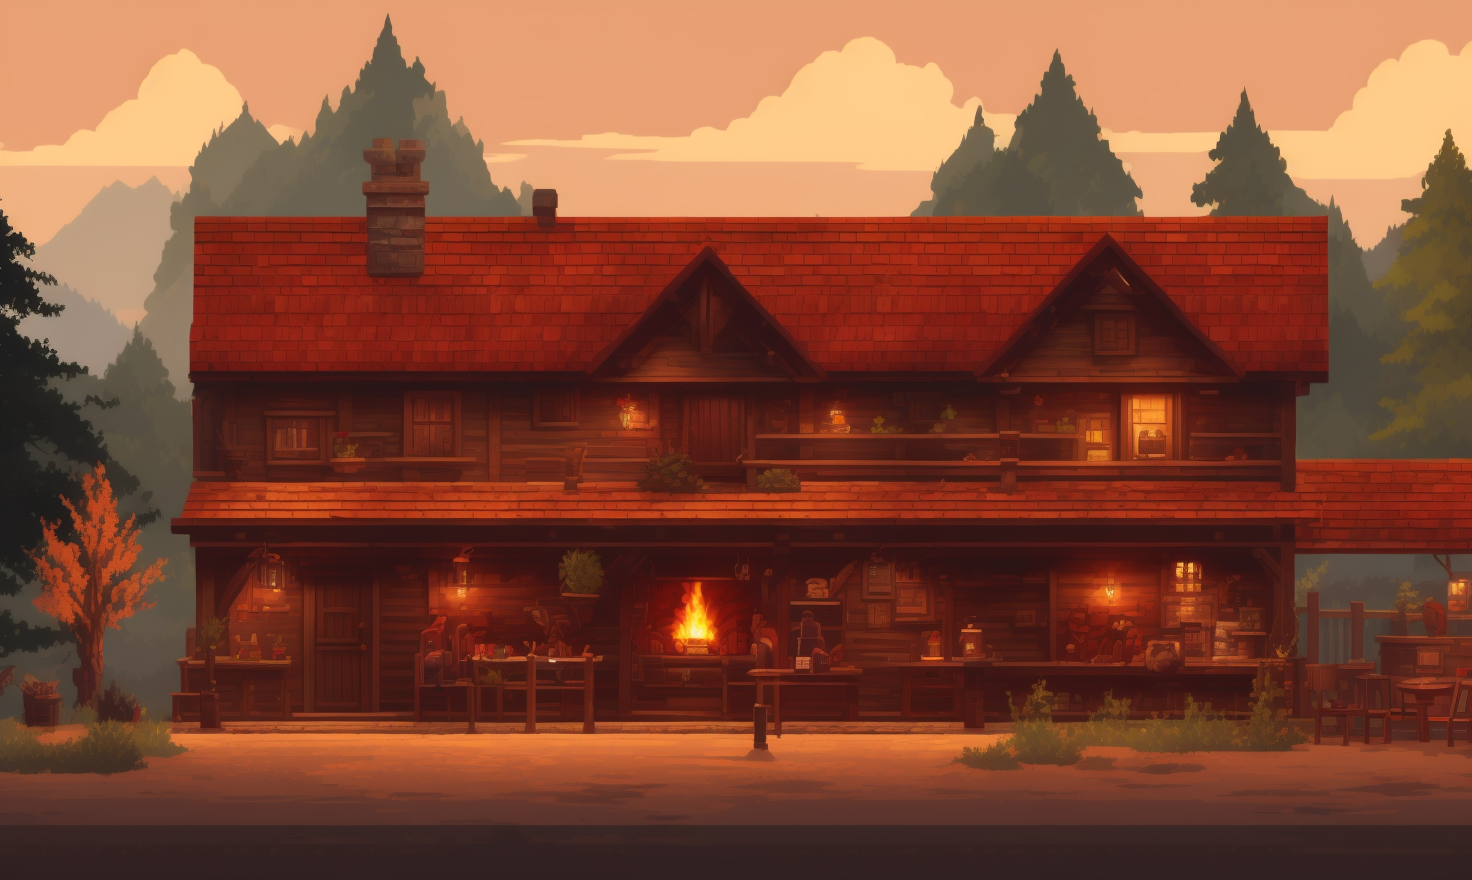 pixelart  video game environment, Produce an image of a charming and cozy tavern, with a roaring fireplace, a friendly bar...